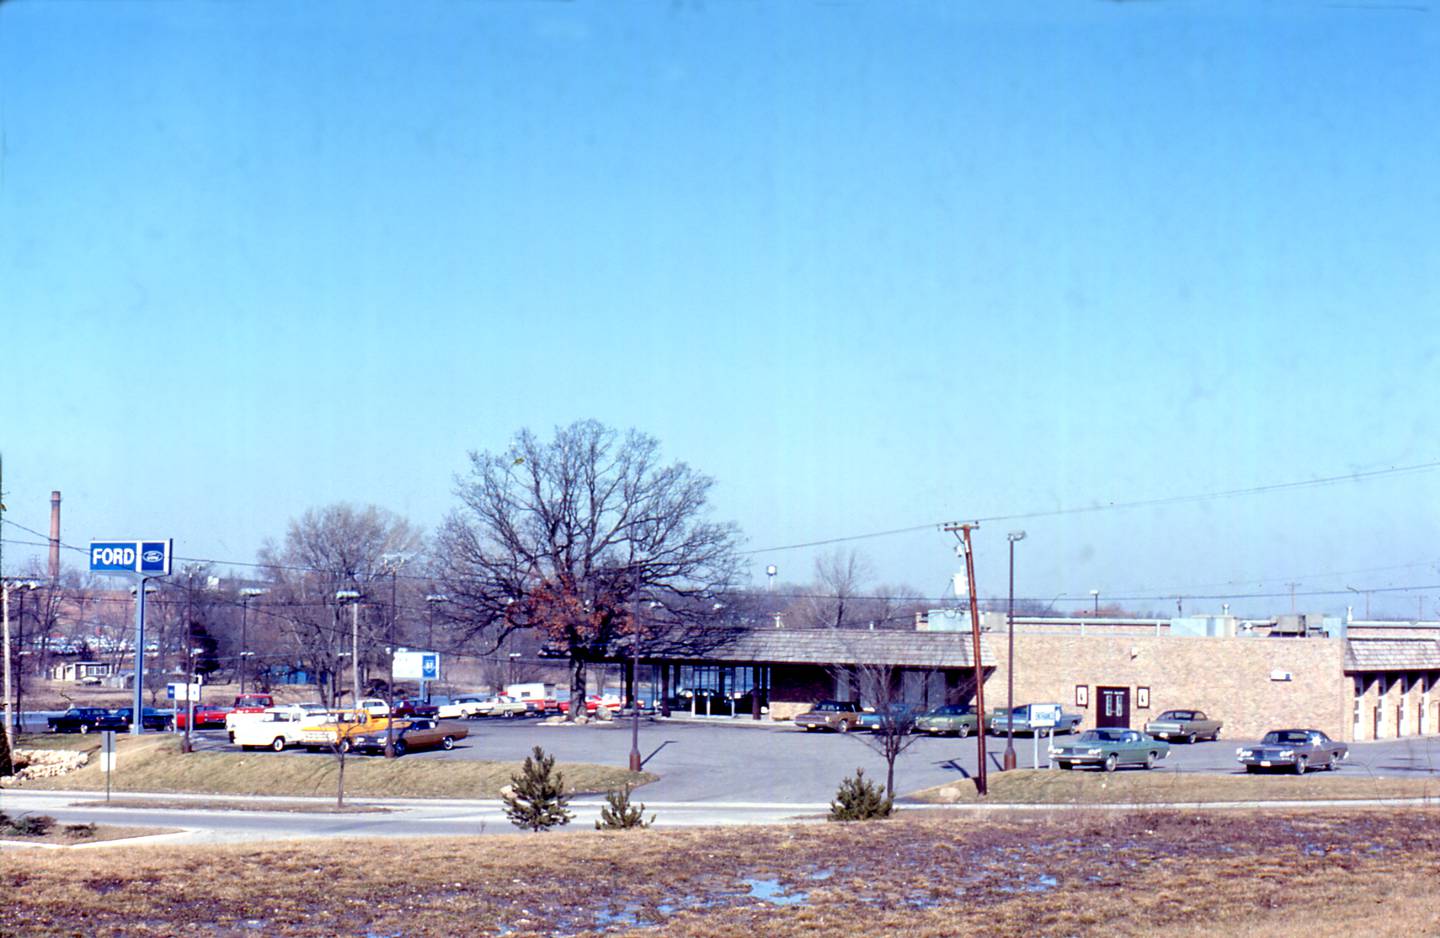 Boulder Point was originally constructed to house the Zentmyer Ford dealership in 1967. Here is how the building appeared shortly after it opened. (Photo provided)